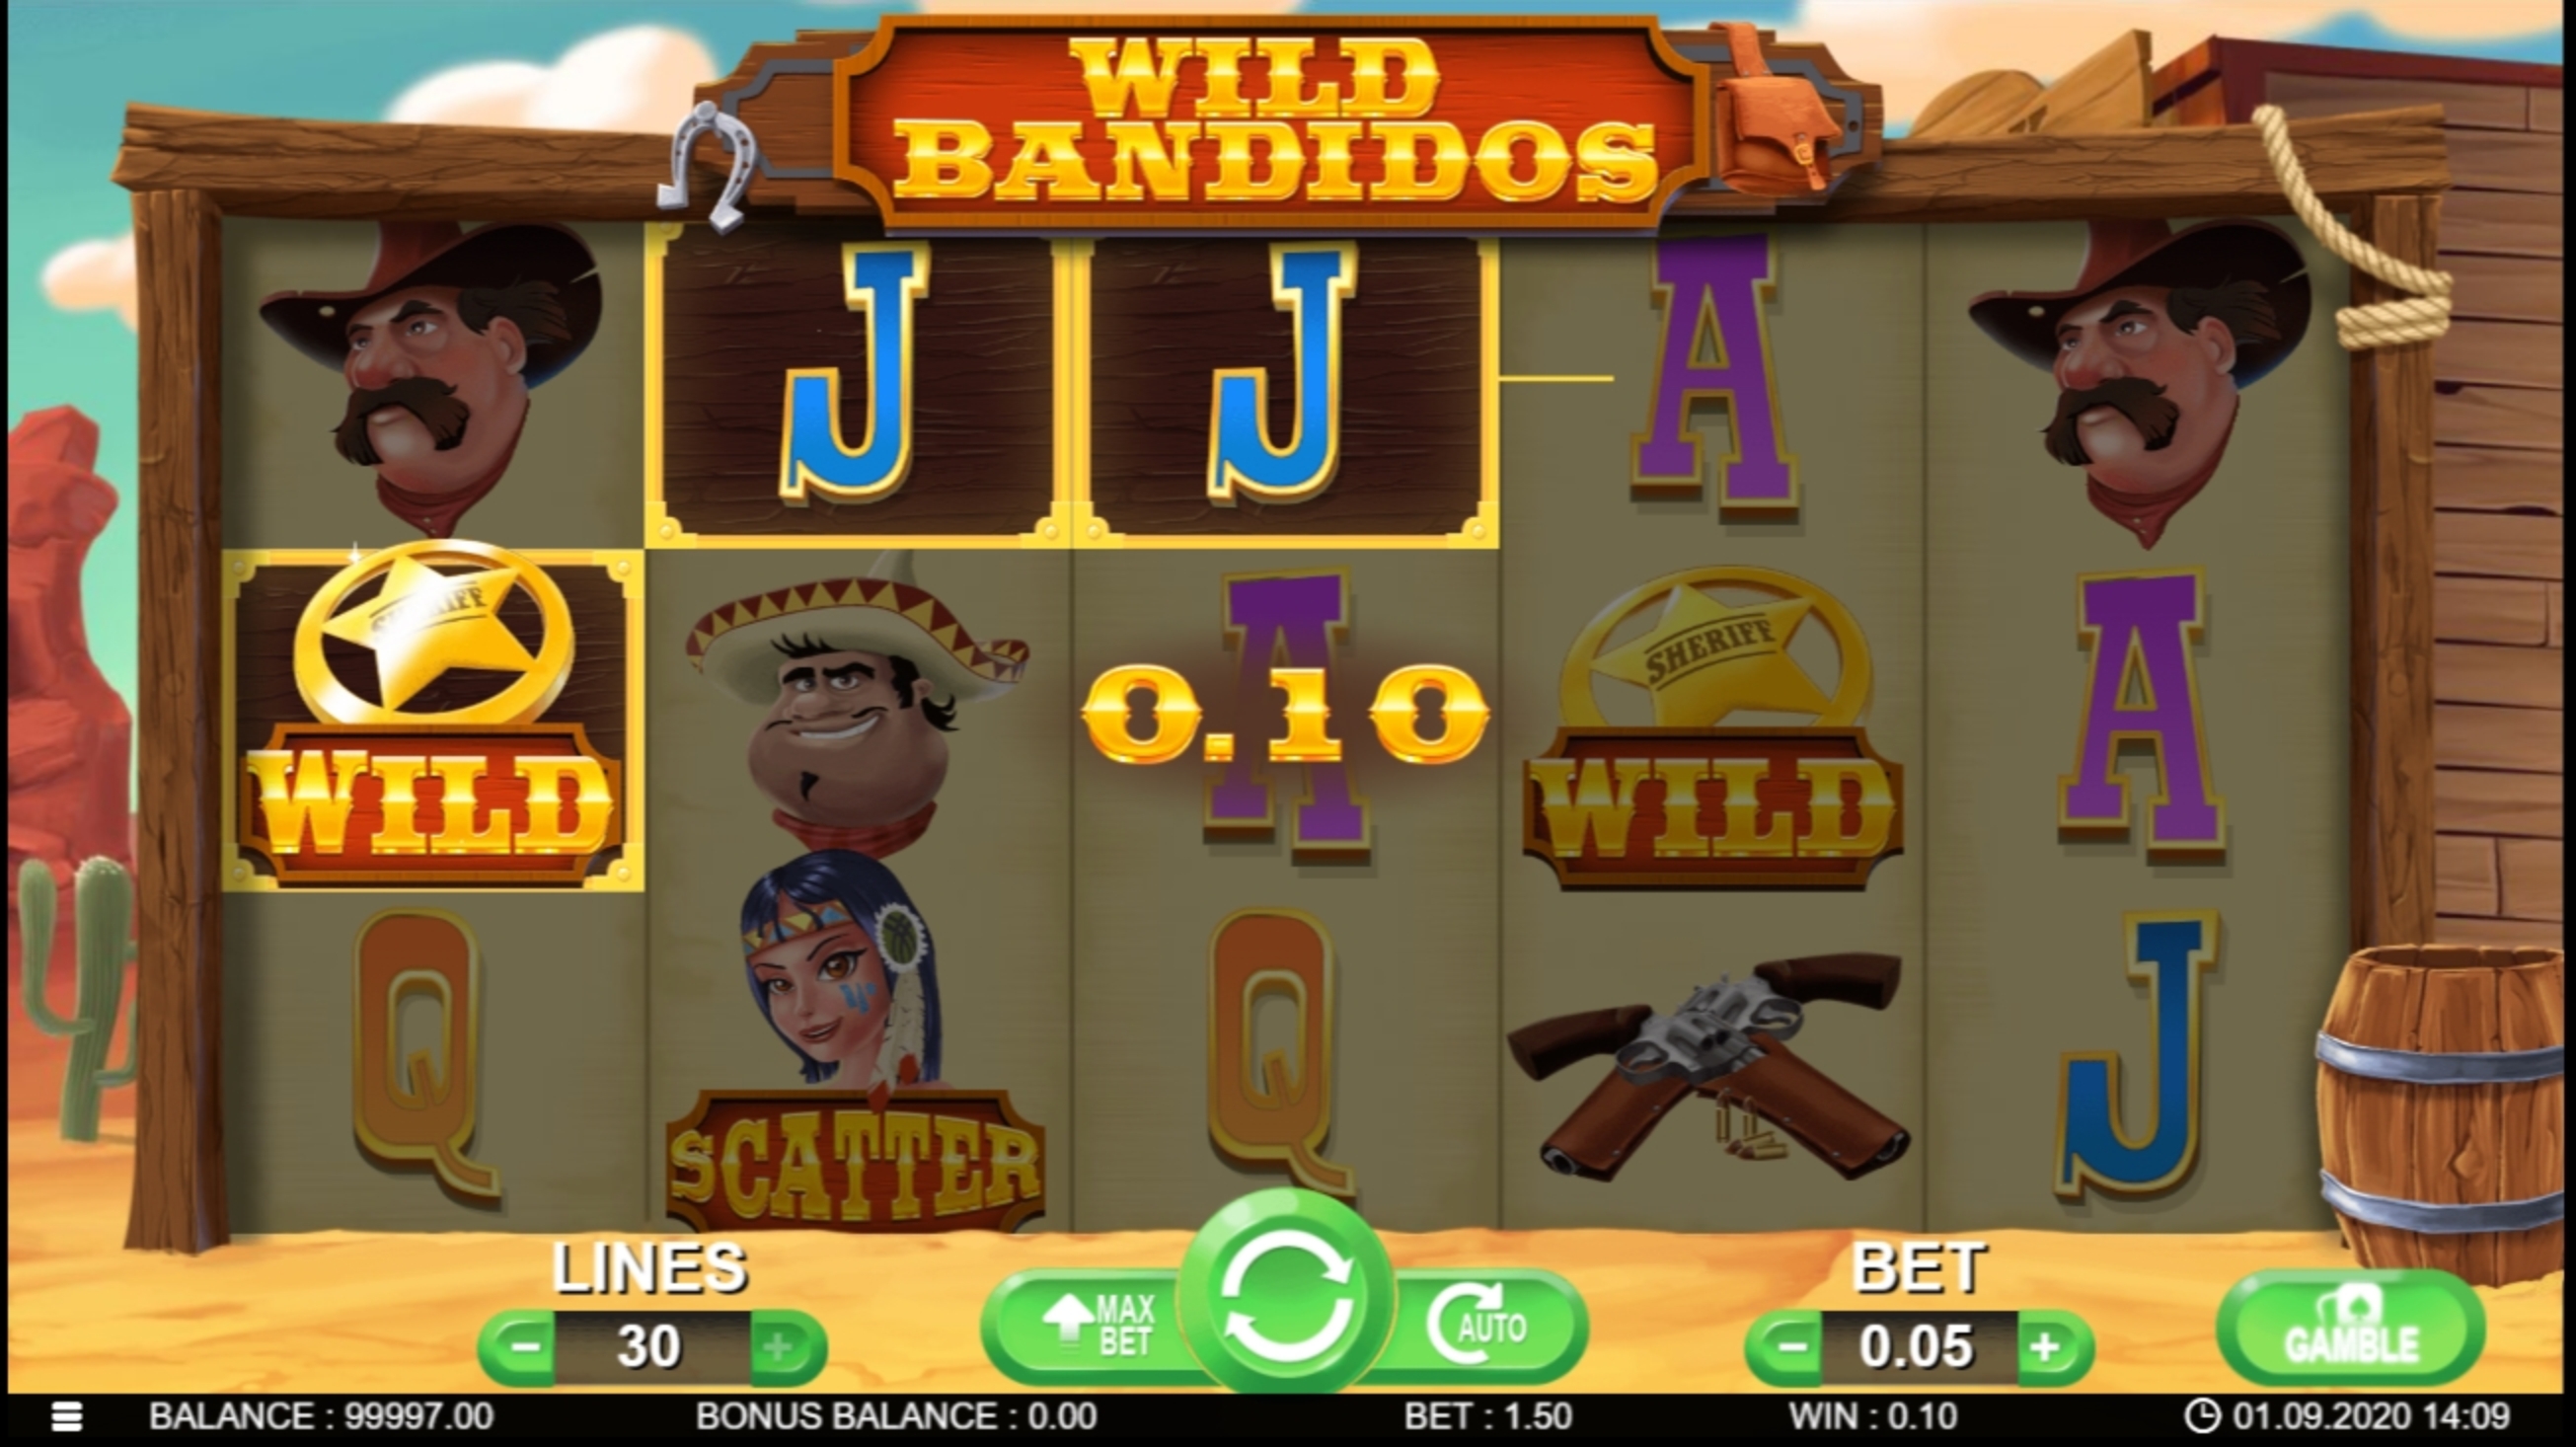 Win Money in Wild Bandidos Free Slot Game by 7mojos